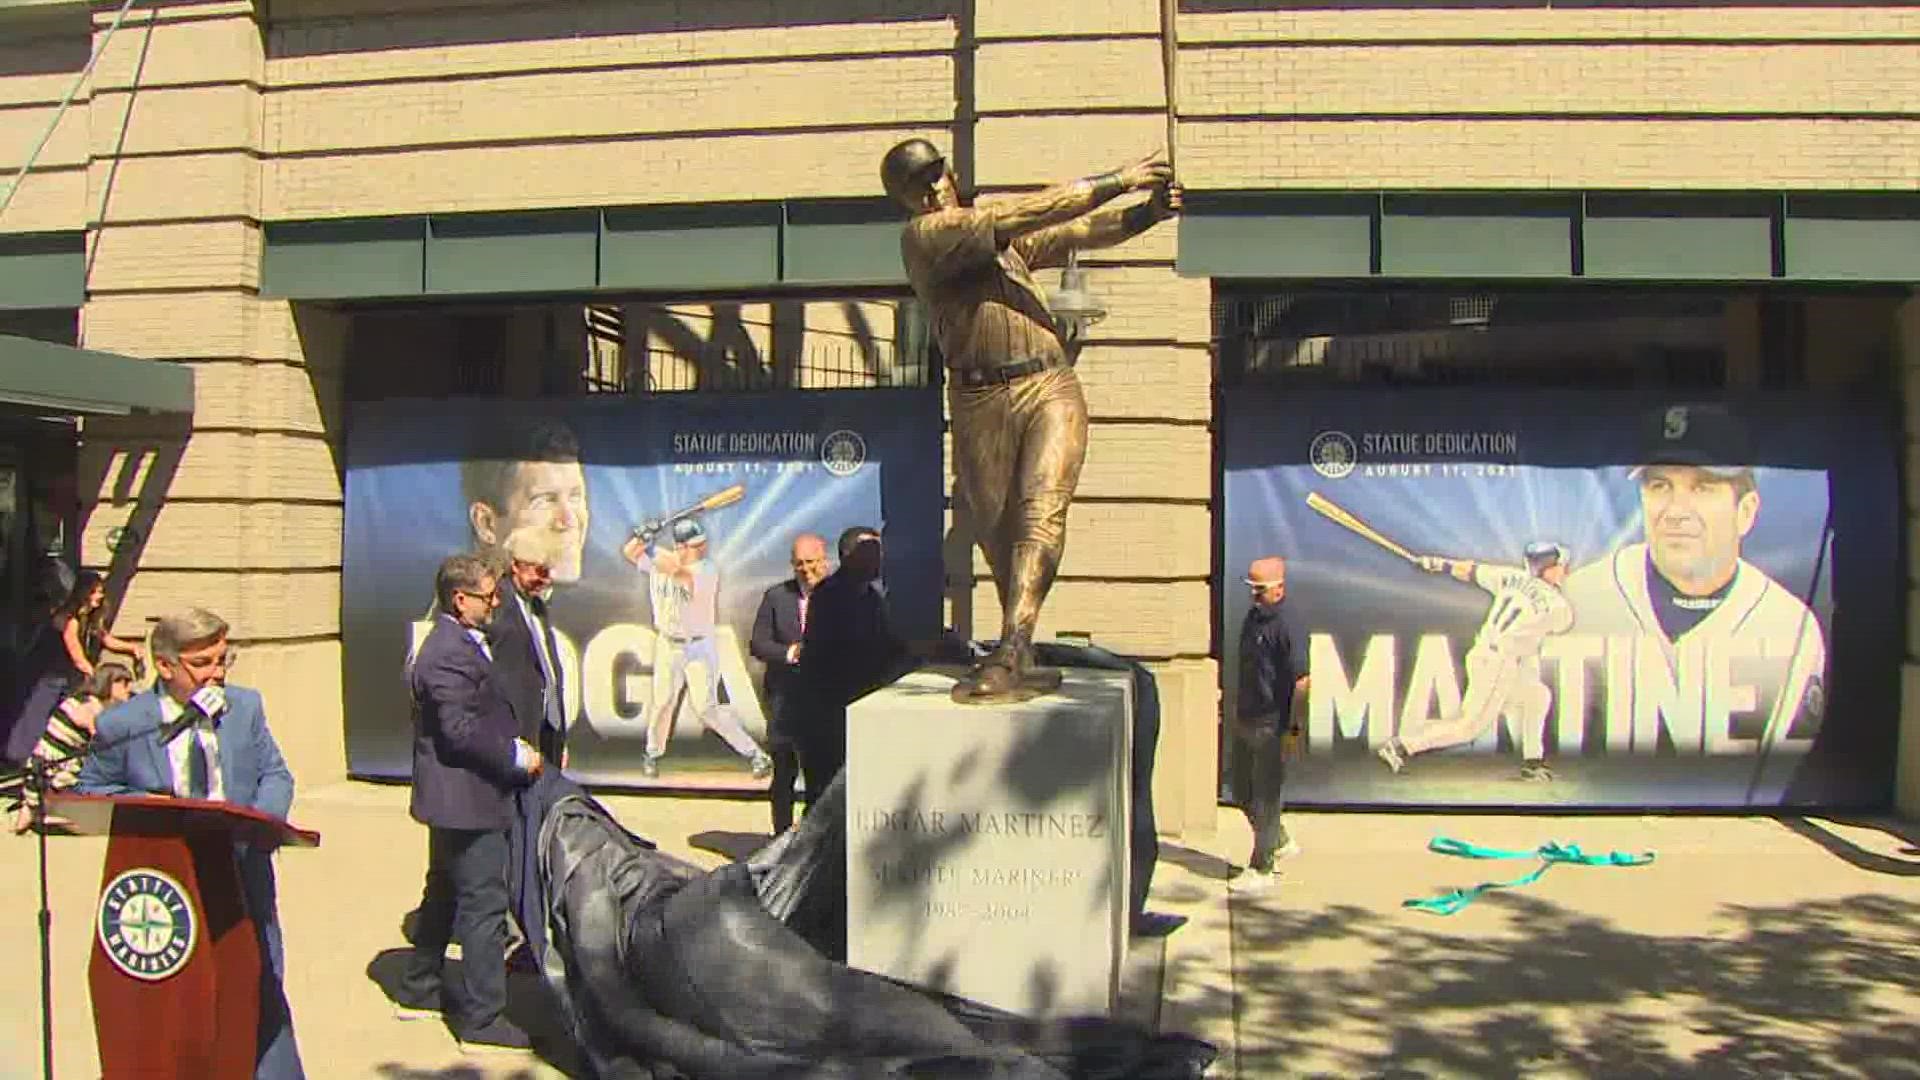 Statue unveiled for Edgar Martinez, Seattle Mariners hitting legend,  outside T-Mobile Park